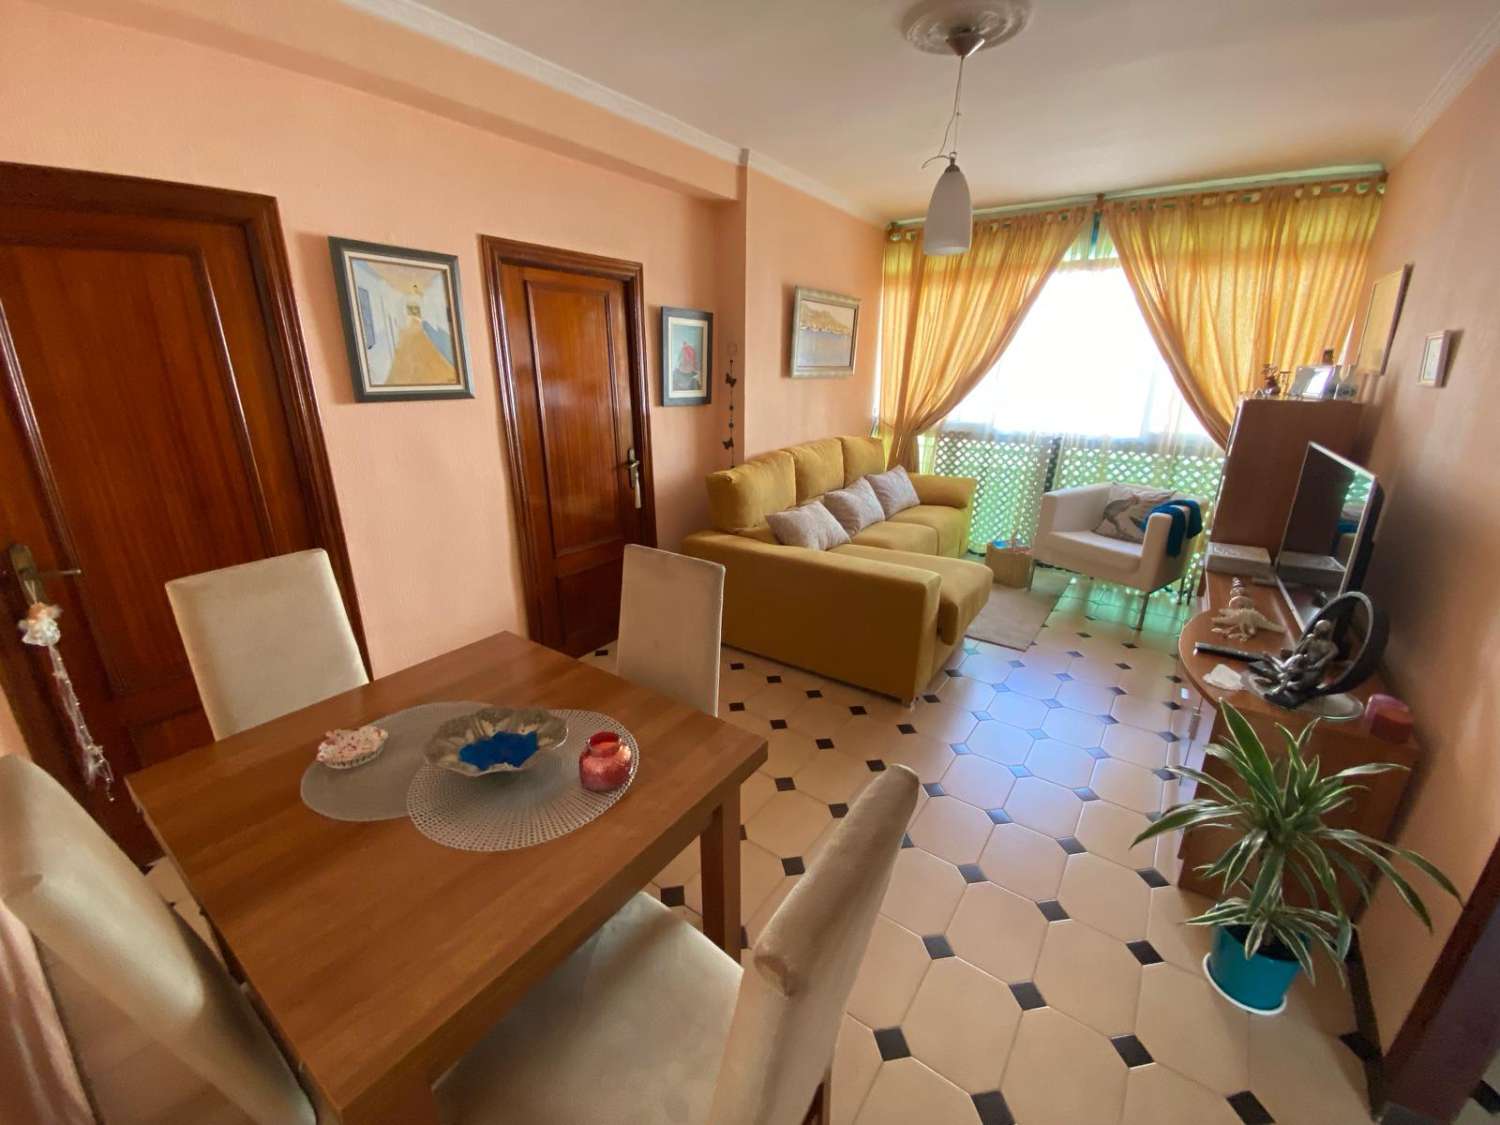 3 bedroom apartment for sale in good conditions